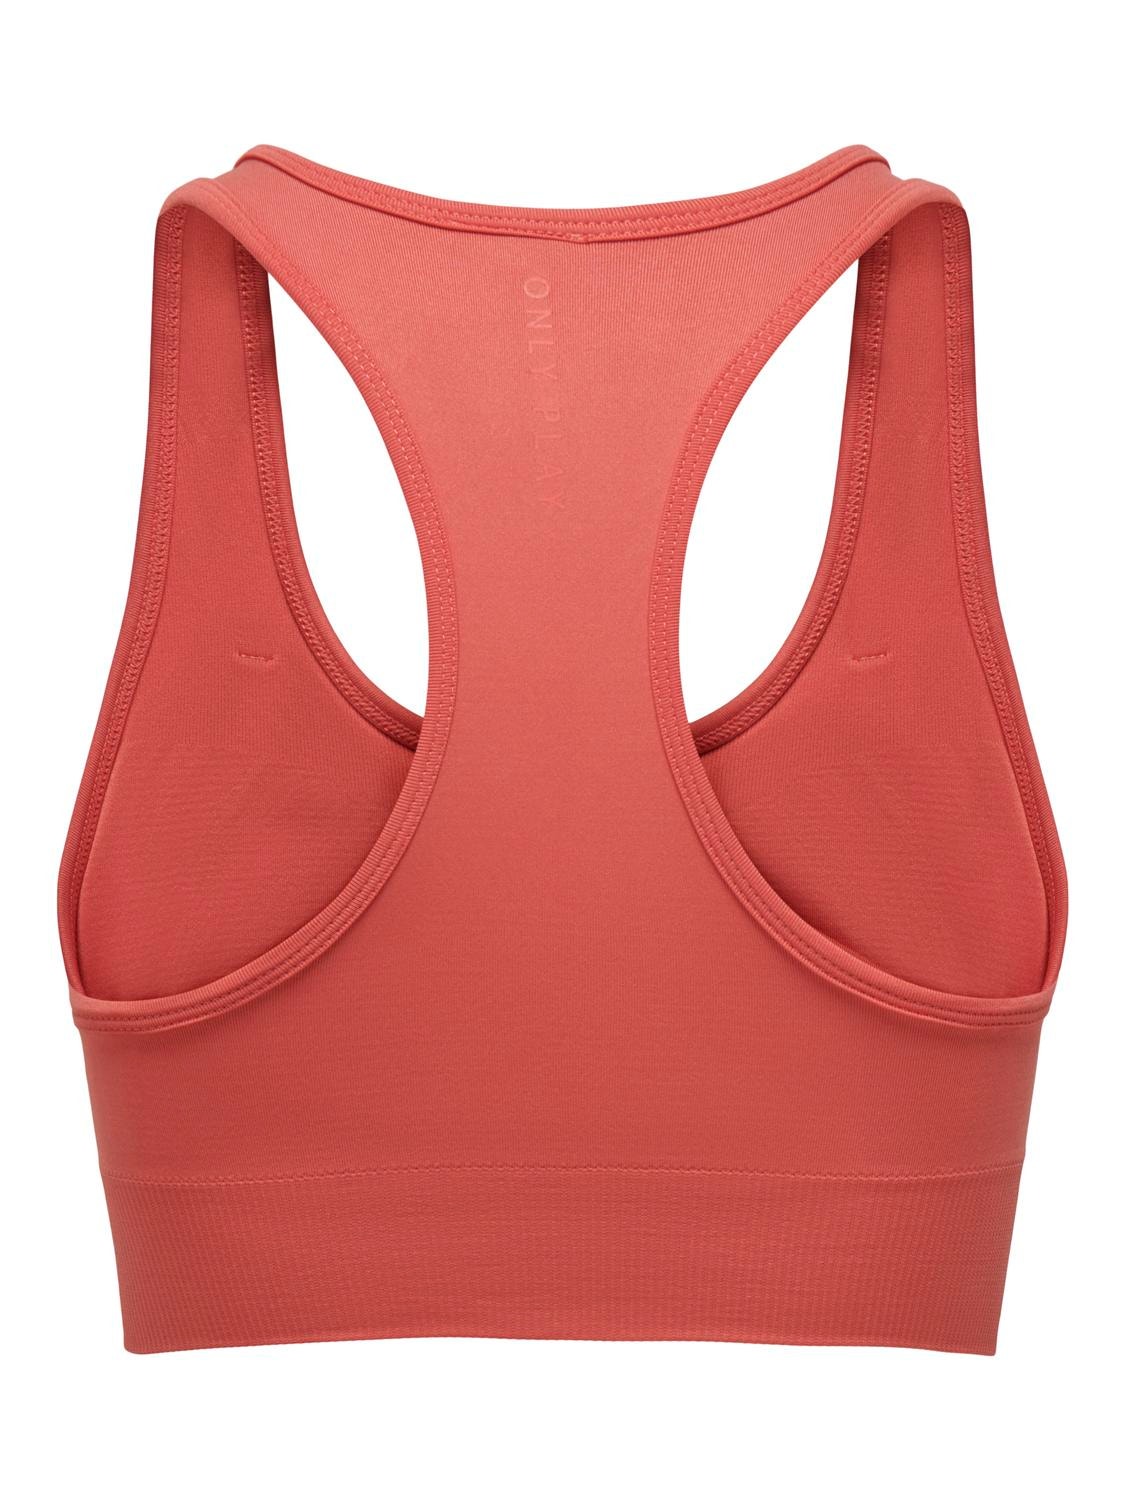 Seamless Sports Bra with 20% discount!